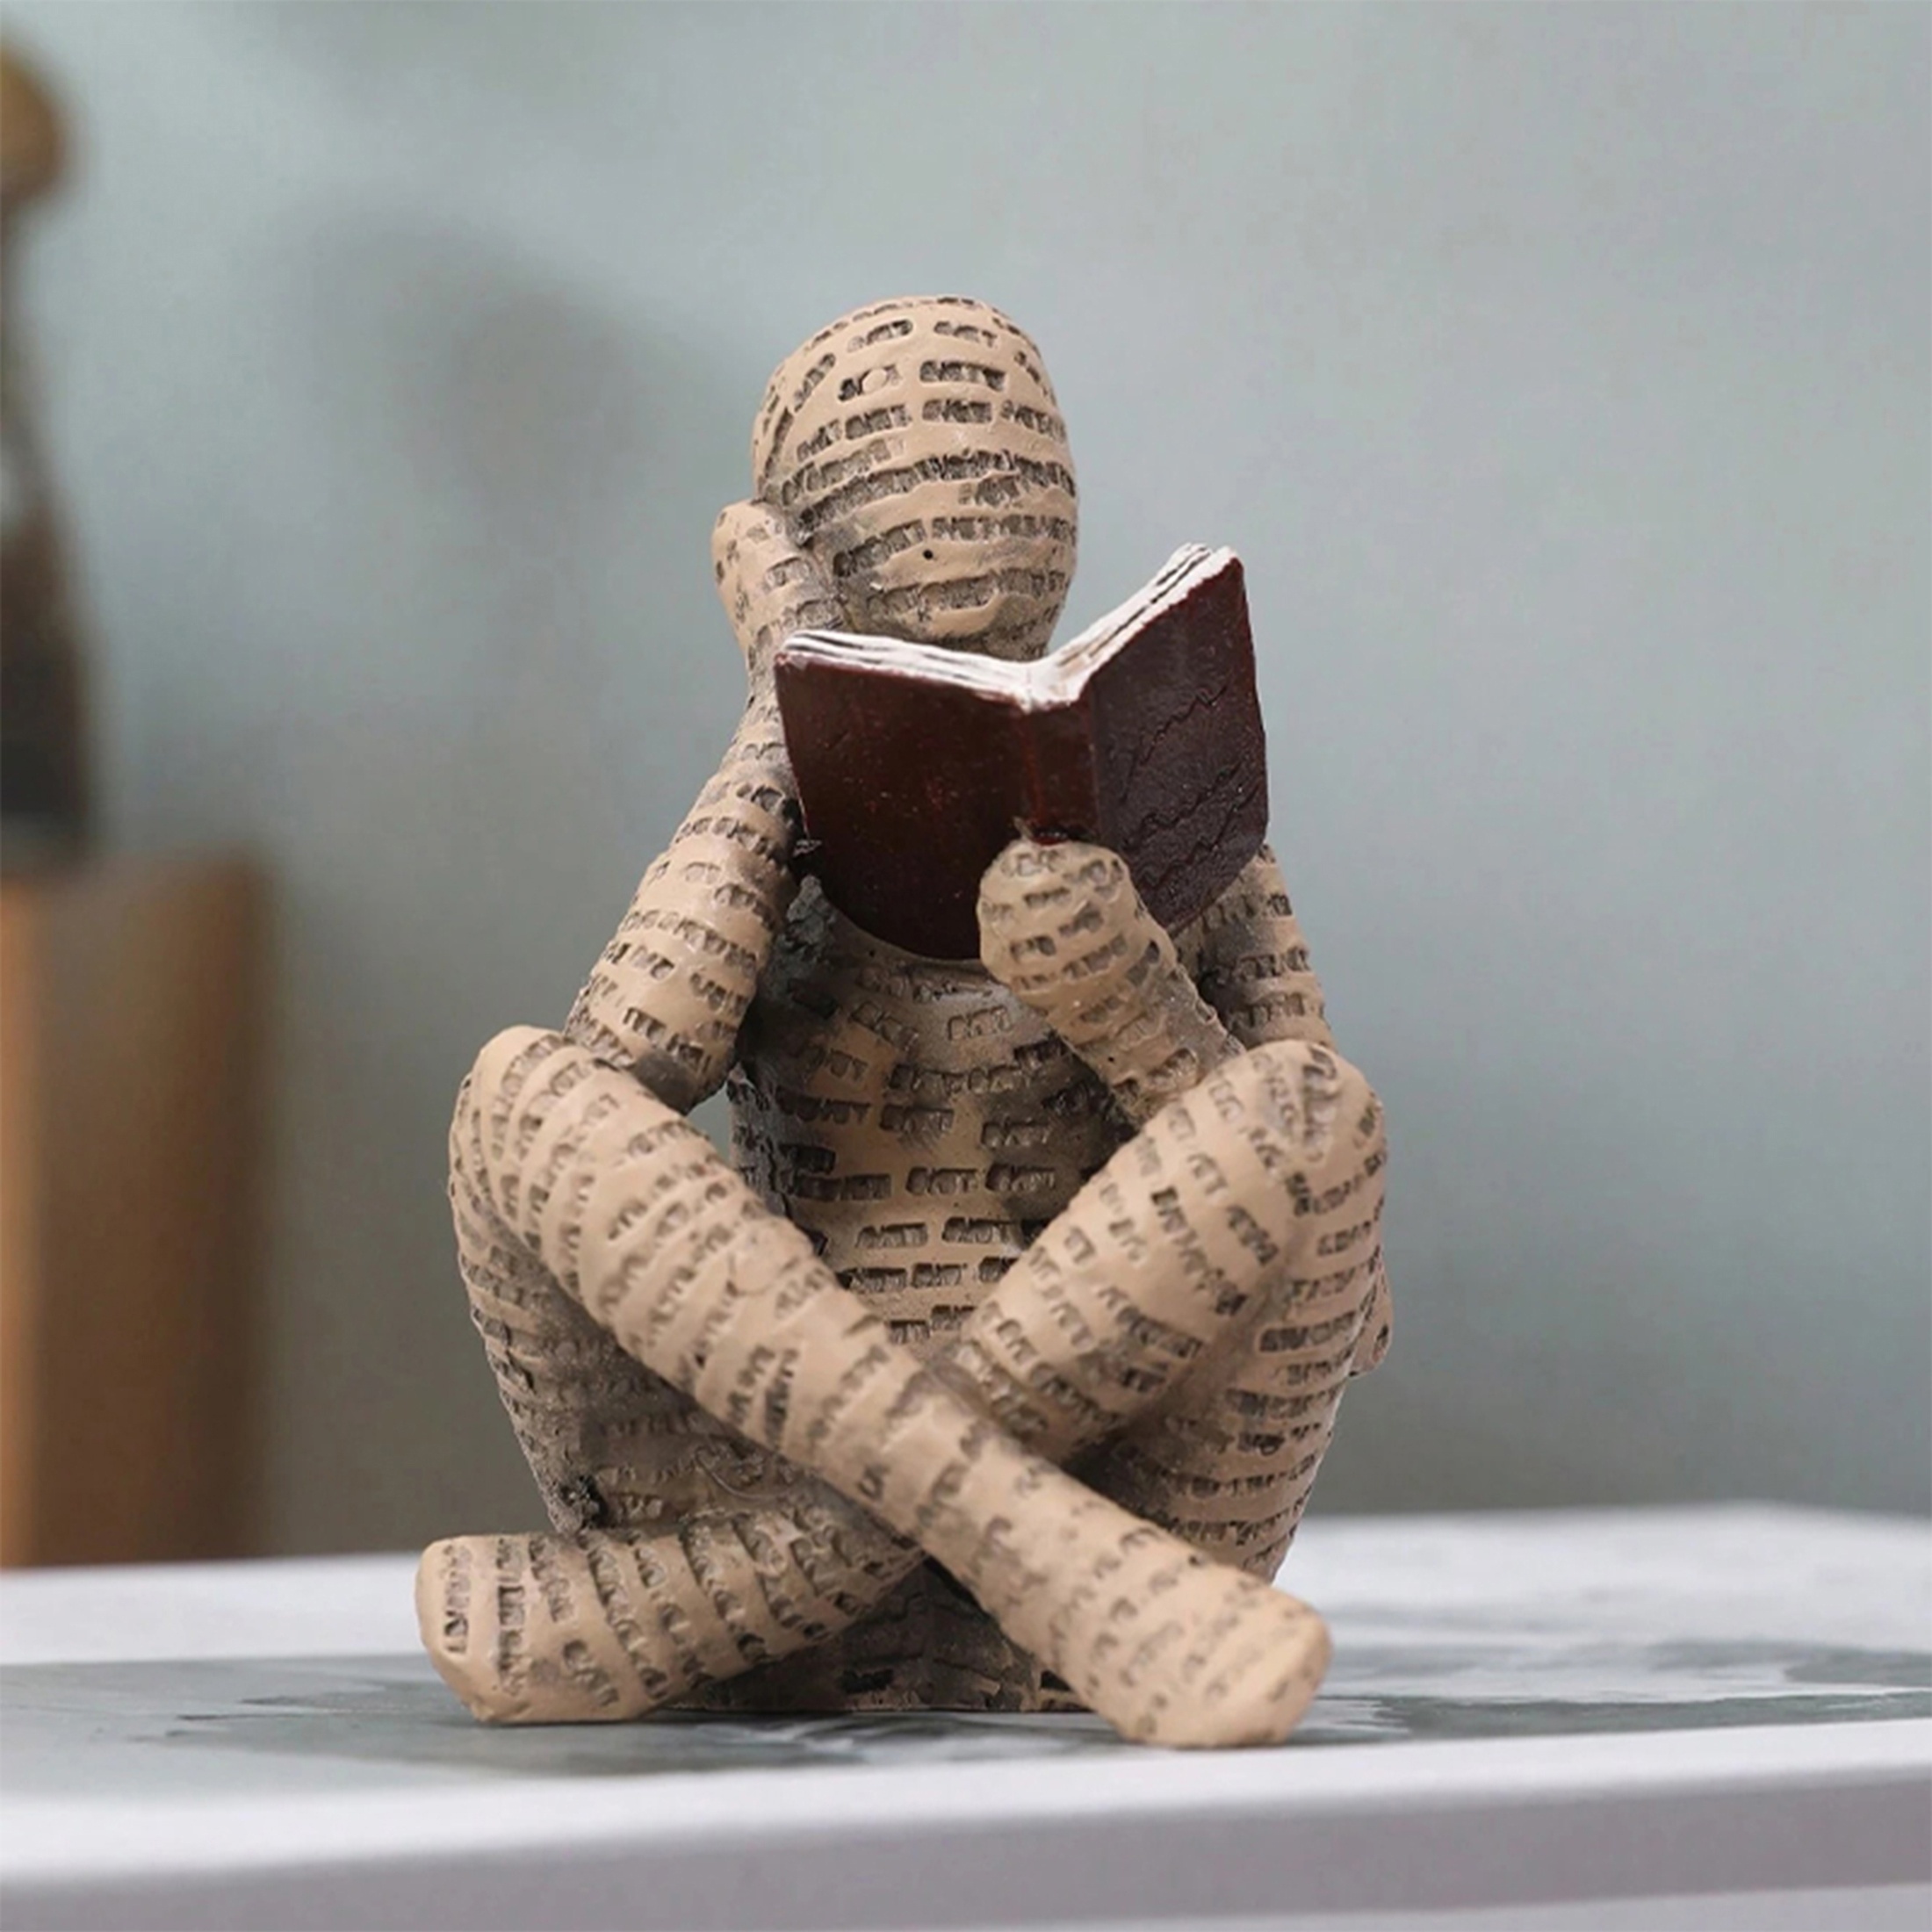 

1pc, Resin Reading Woman Sculpture, Abstract Figure 8cm/3.14inch, Contemporary Book Lover Decor, Versatile Home & Office Accent, Fits Any Season & Room - Ideal Gift For Bibliophiles